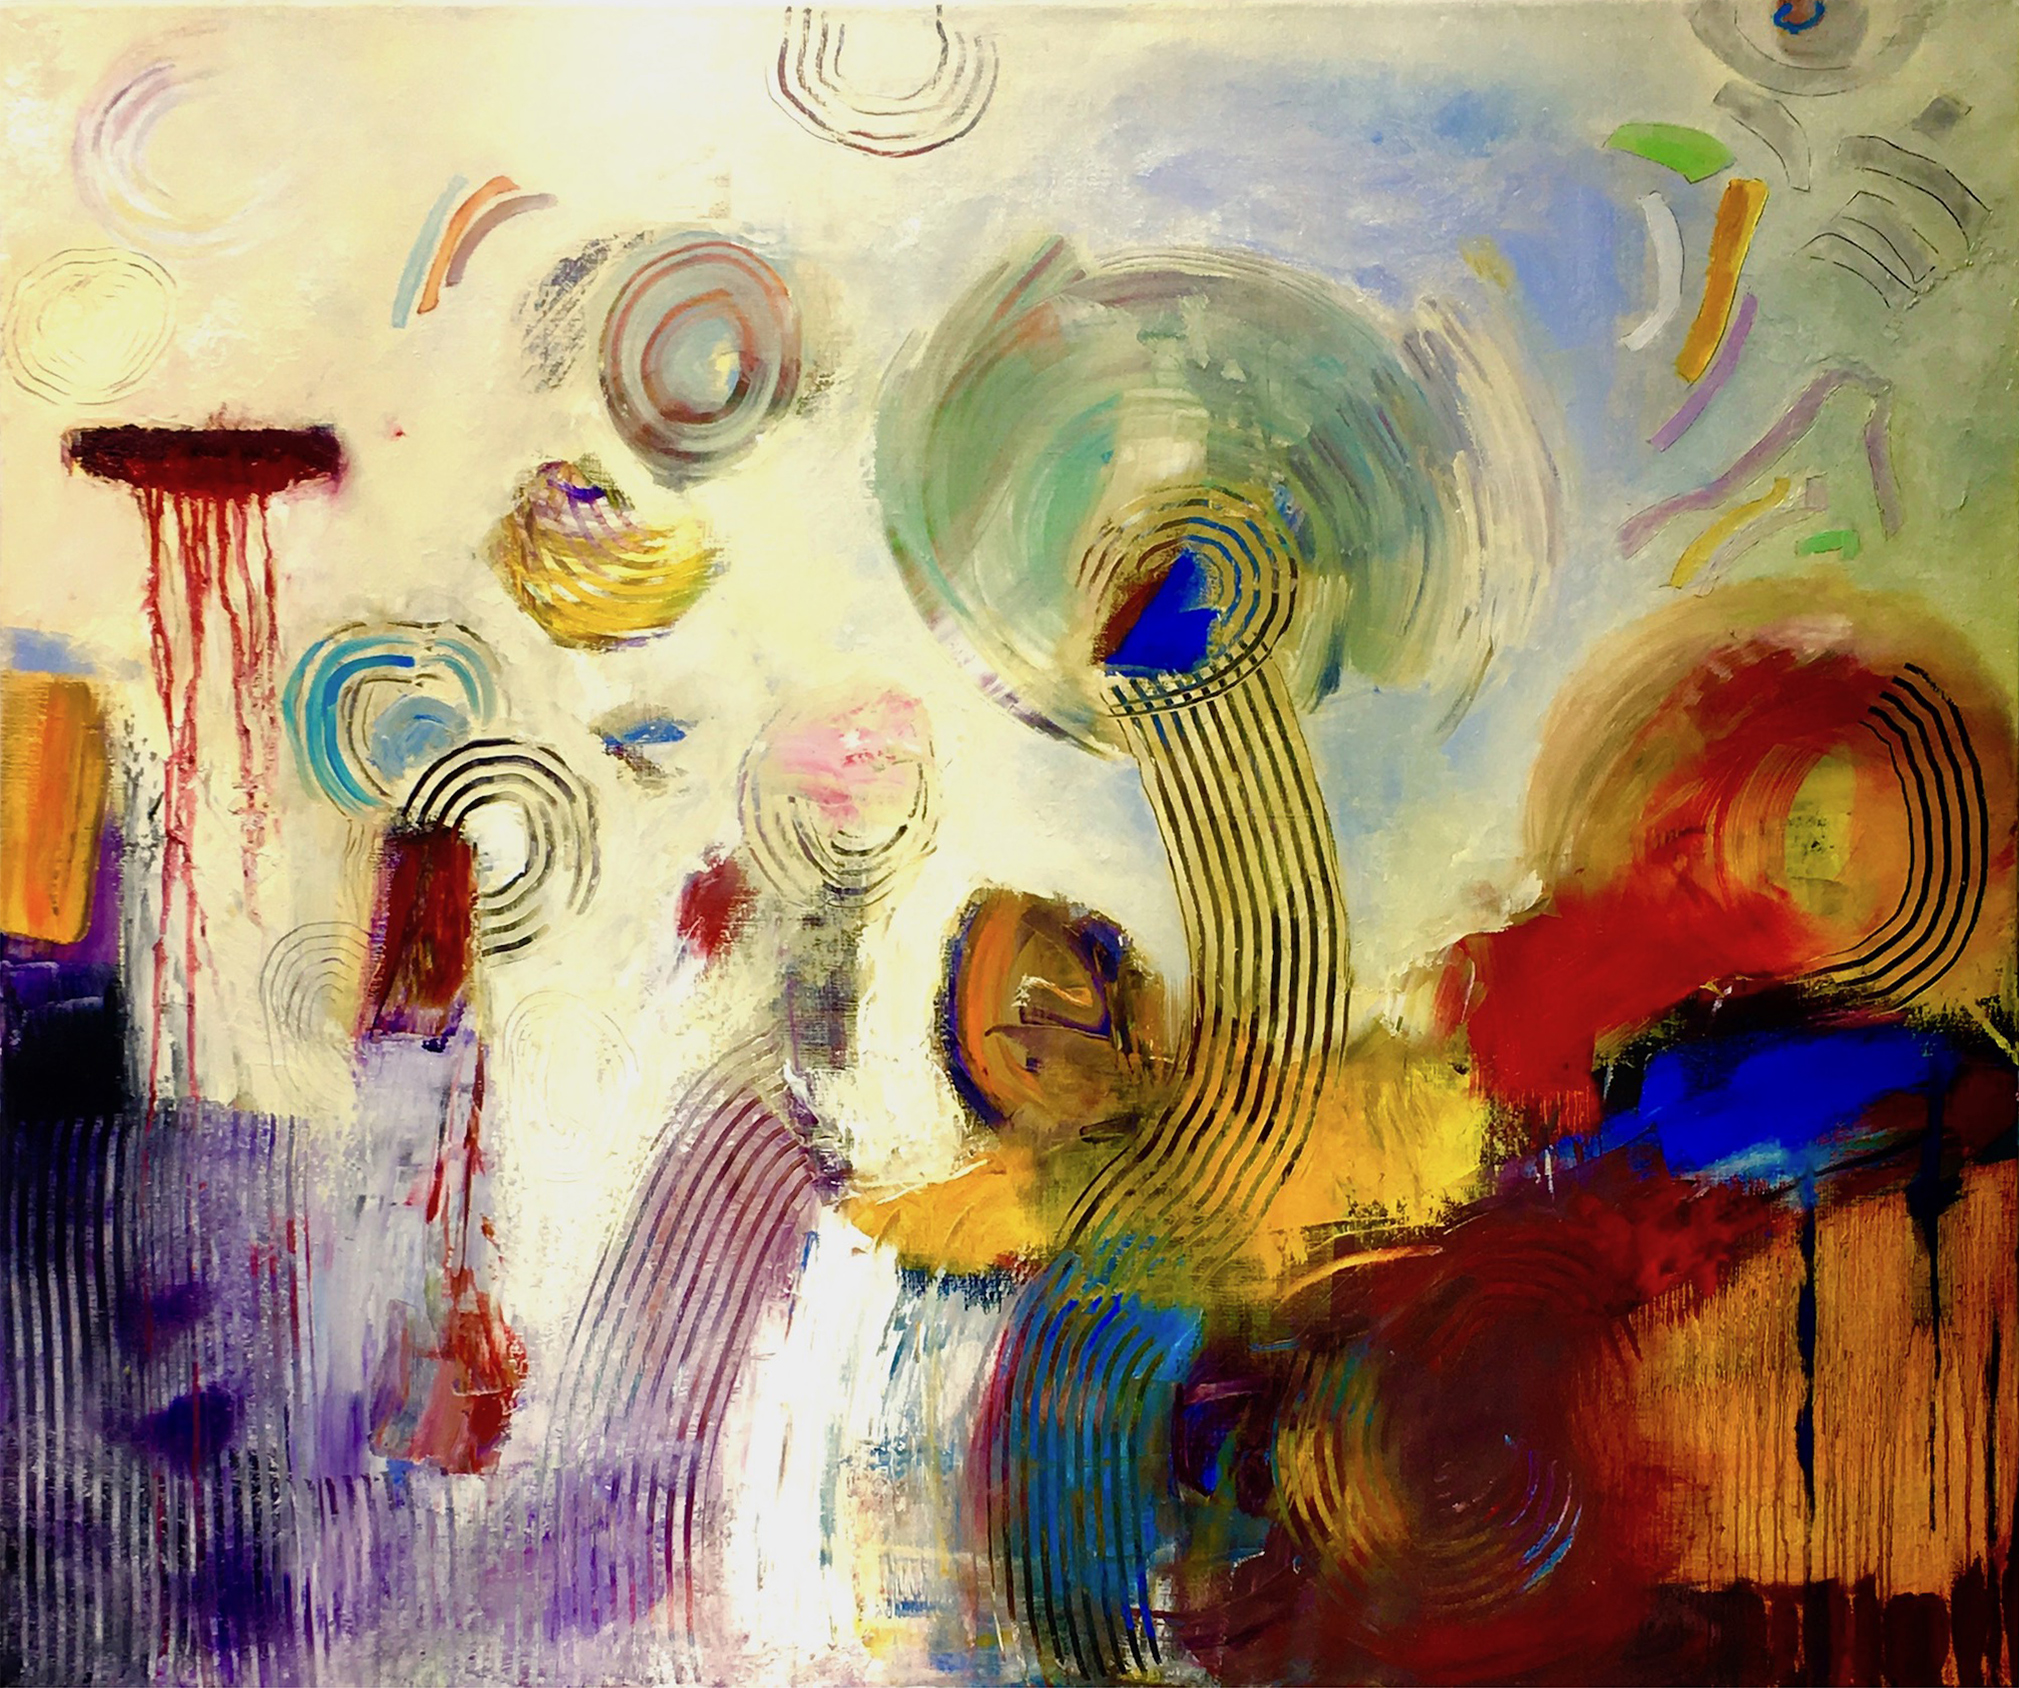   Whose Ideas  Oil and wax on linen 37" x 44.25" 